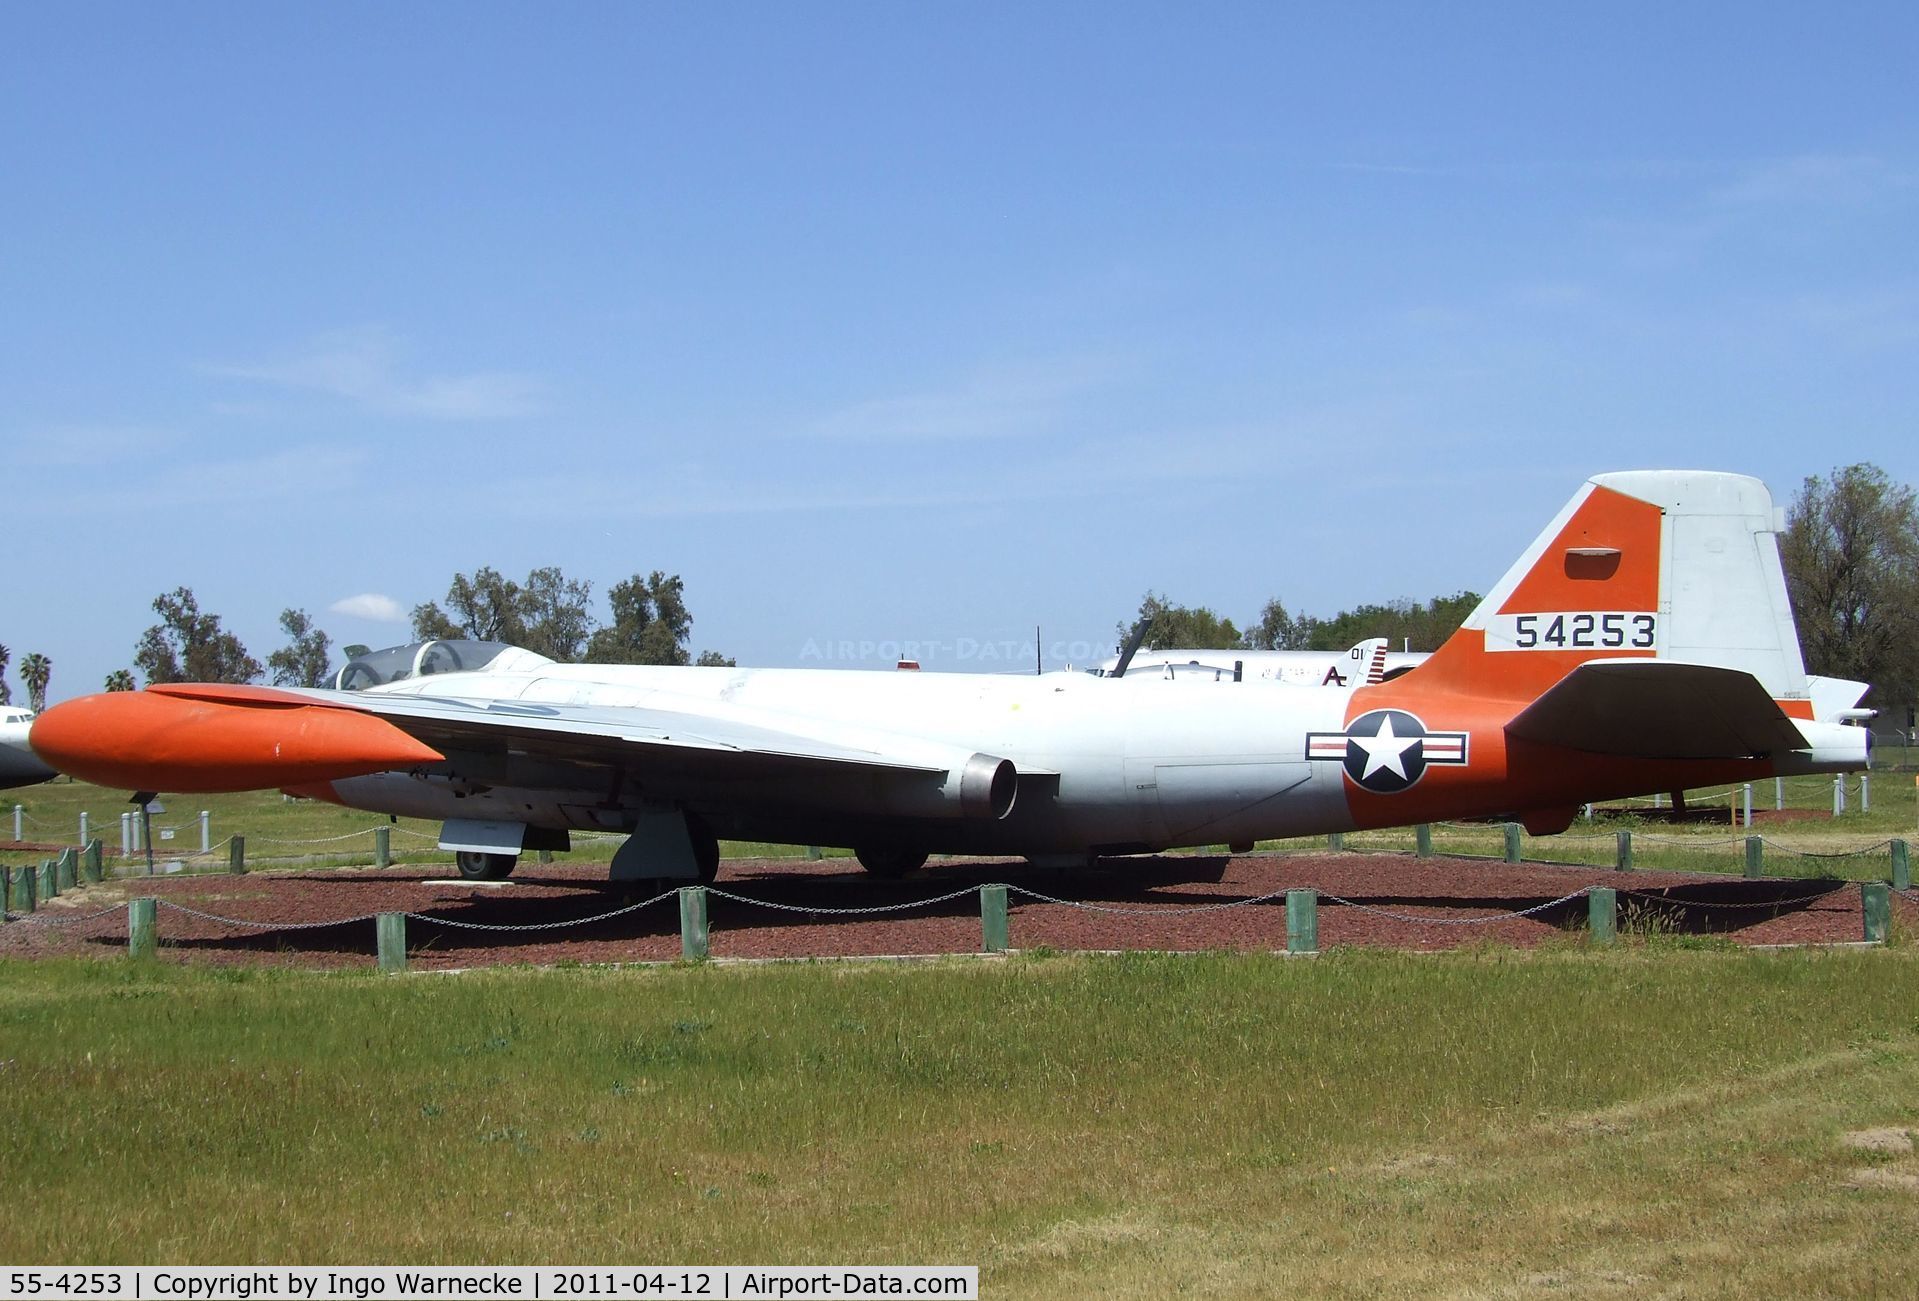 55-4253, 1955 Martin B-57E Canberra C/N 355, Martin EB-57E Canberra at the Castle Air Museum, Atwater CA